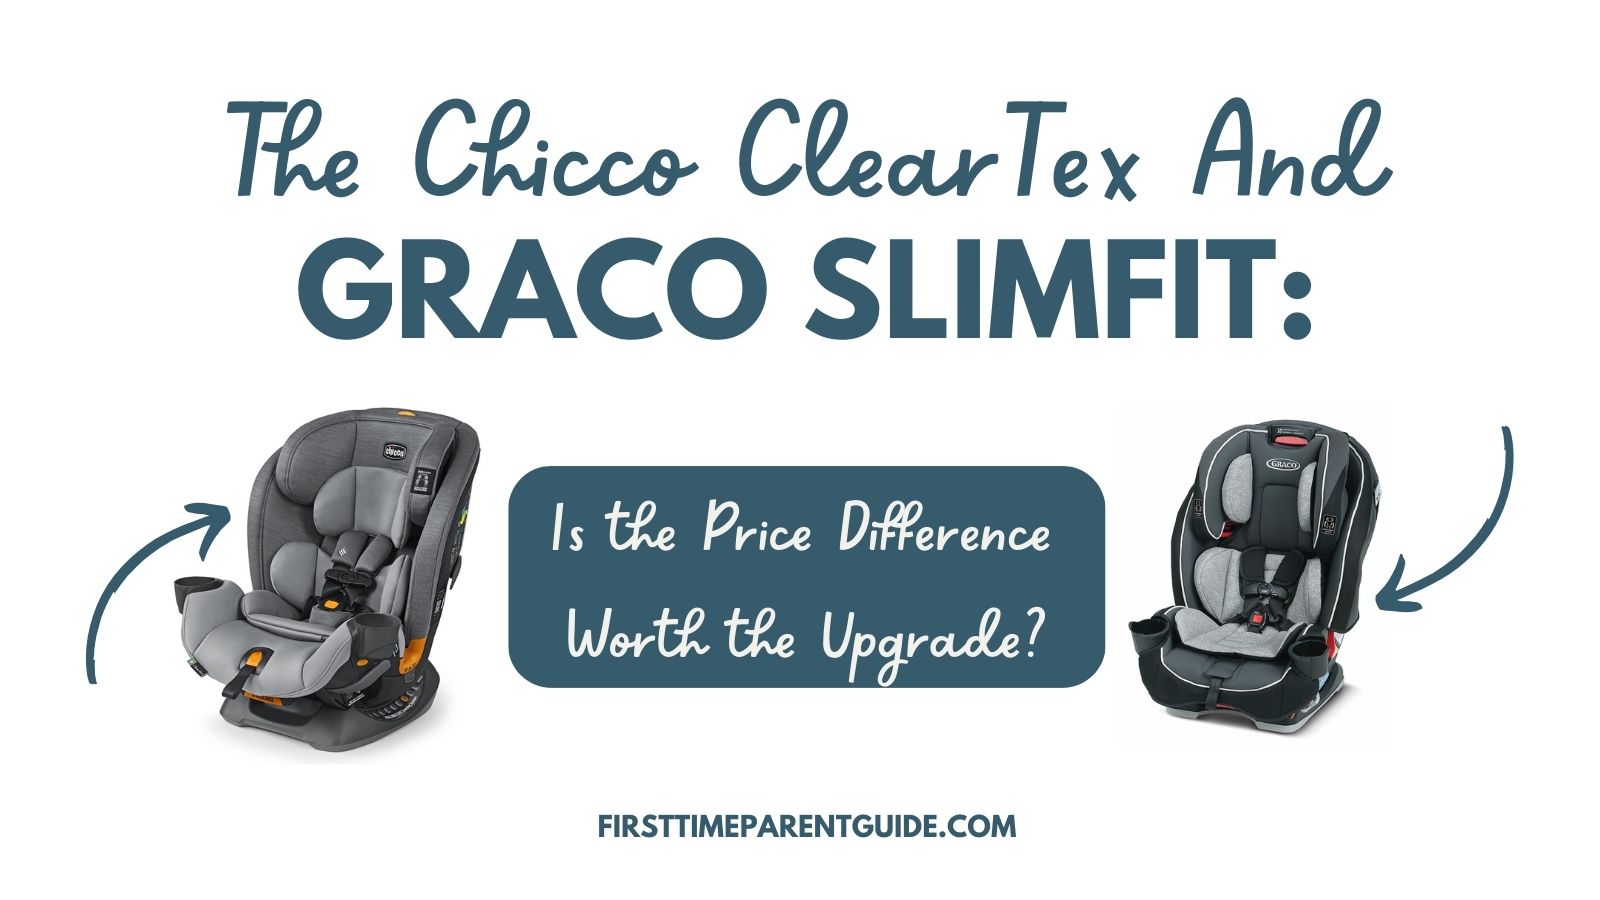 The Chicco ClearTex And